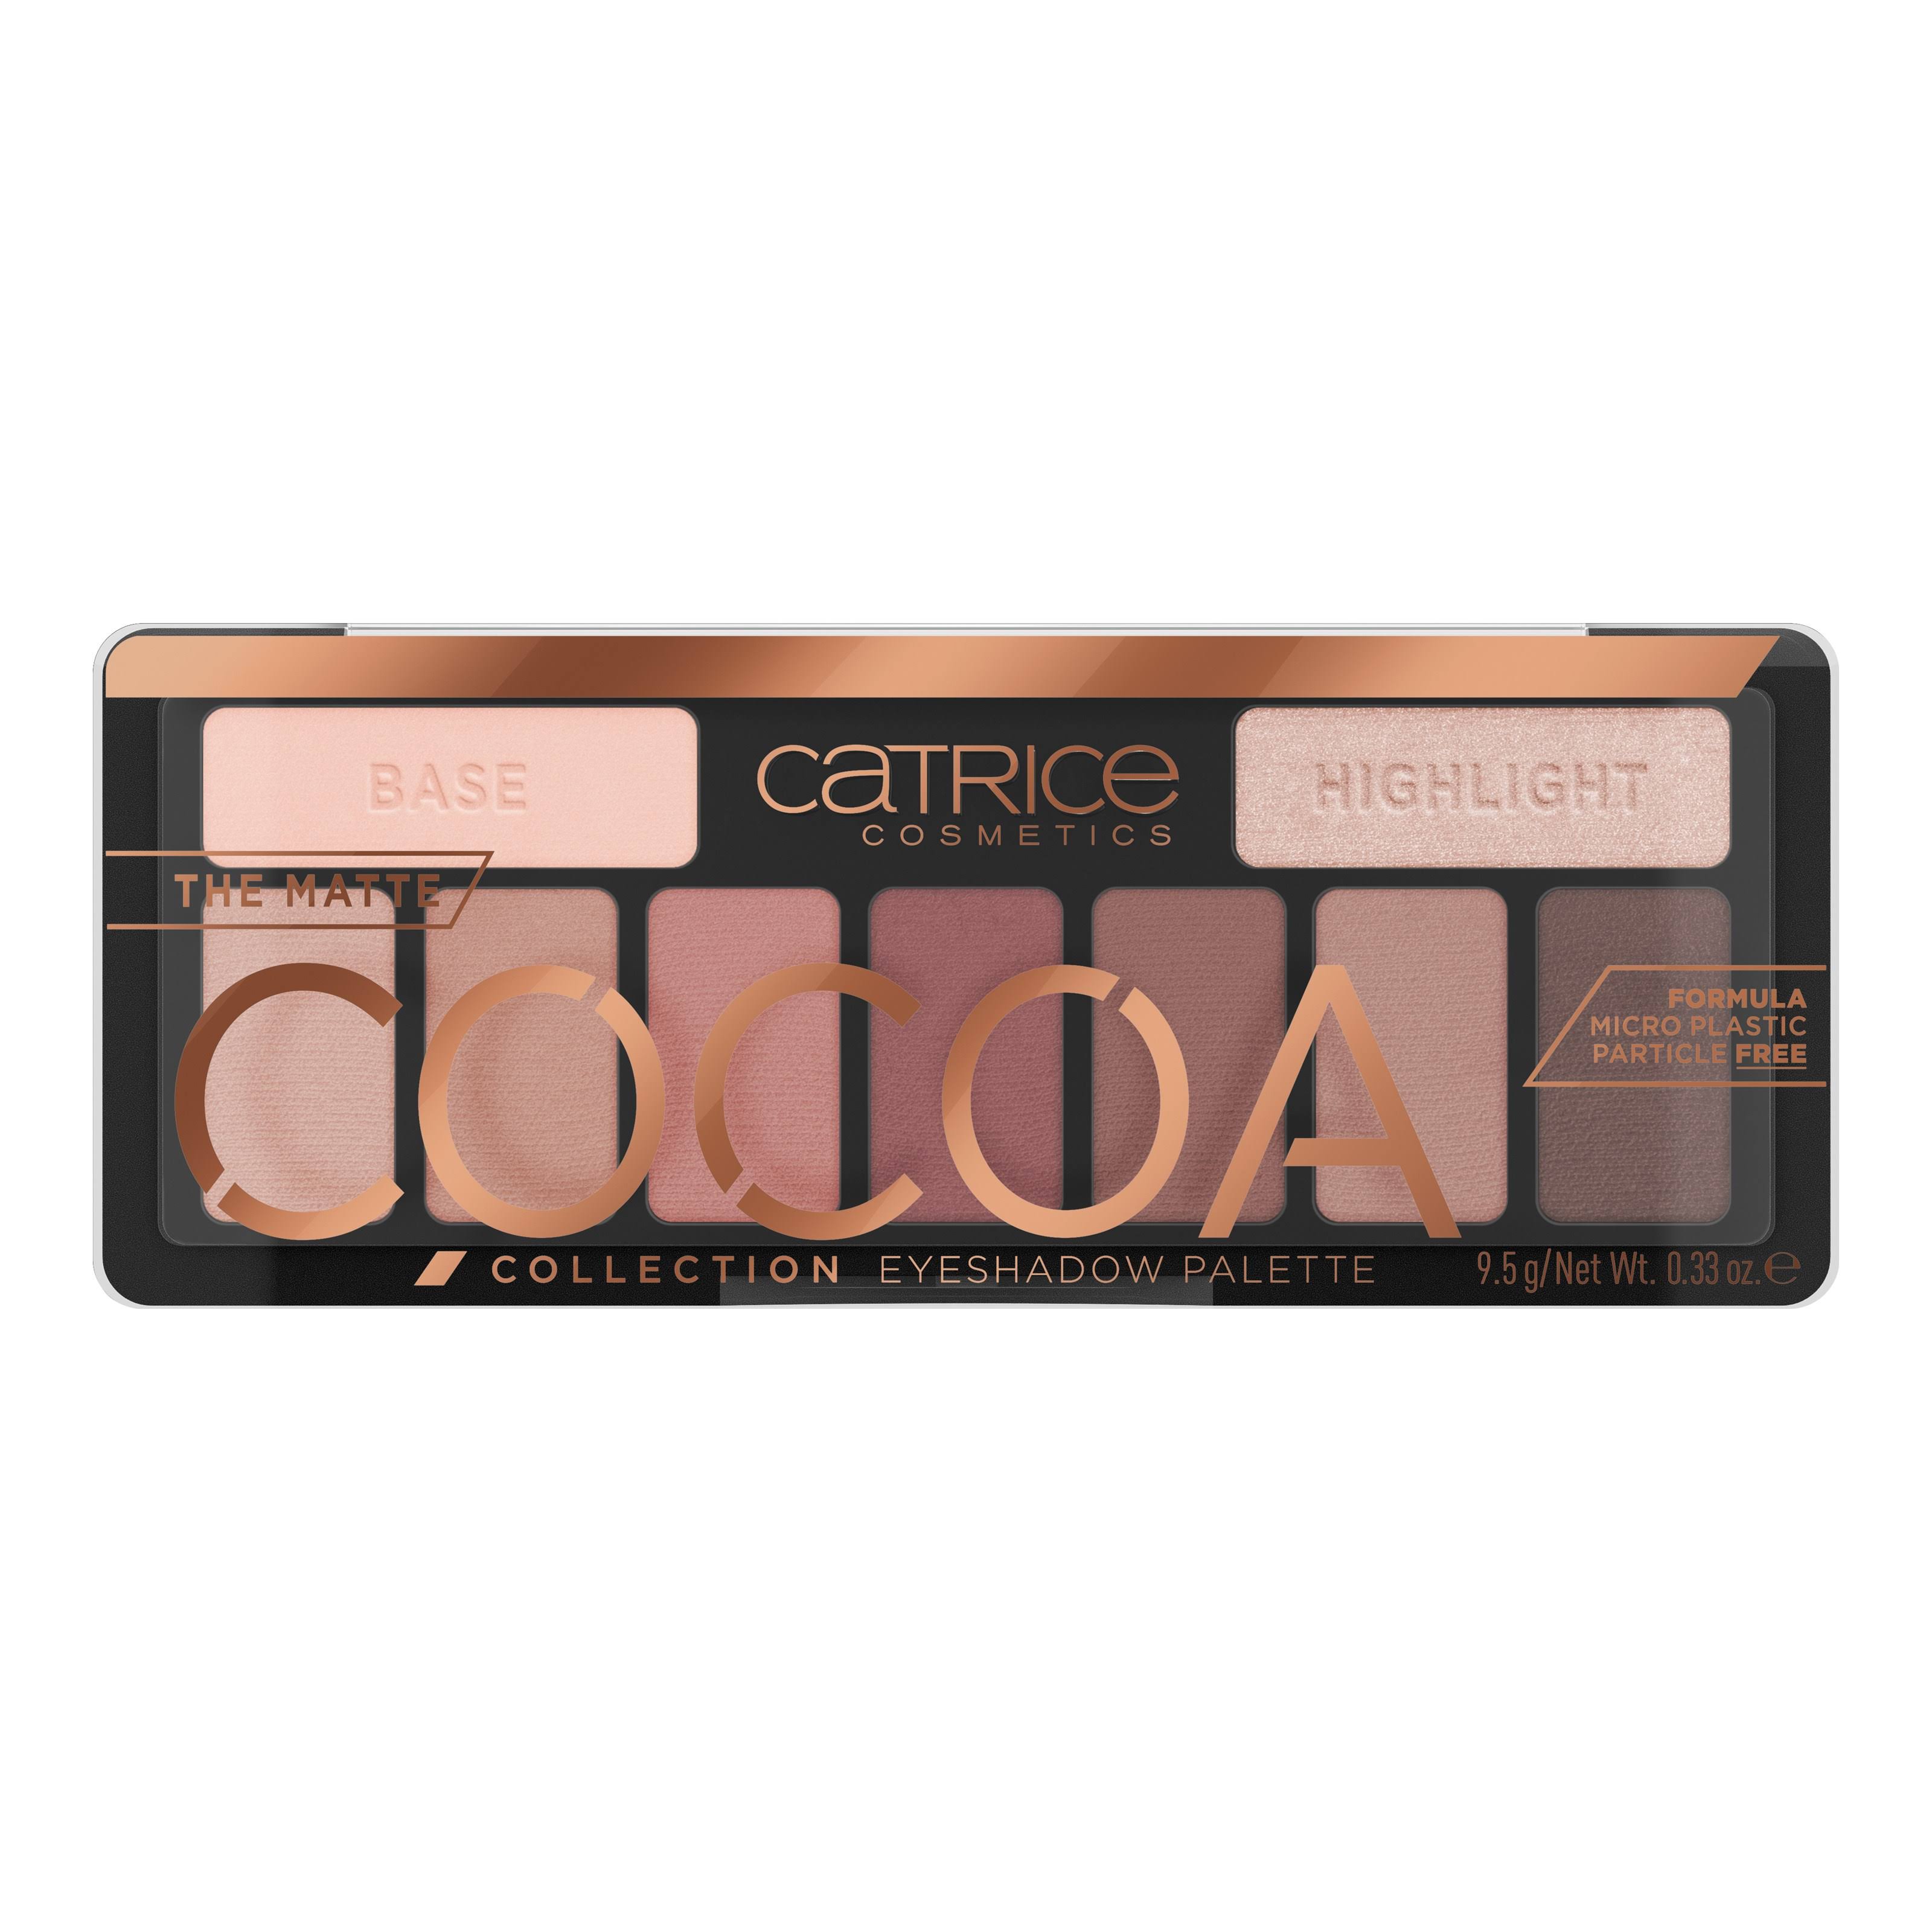 Catrice The Matte Cocoa Collection Eyeshadow Palette #010 9,50 Gr